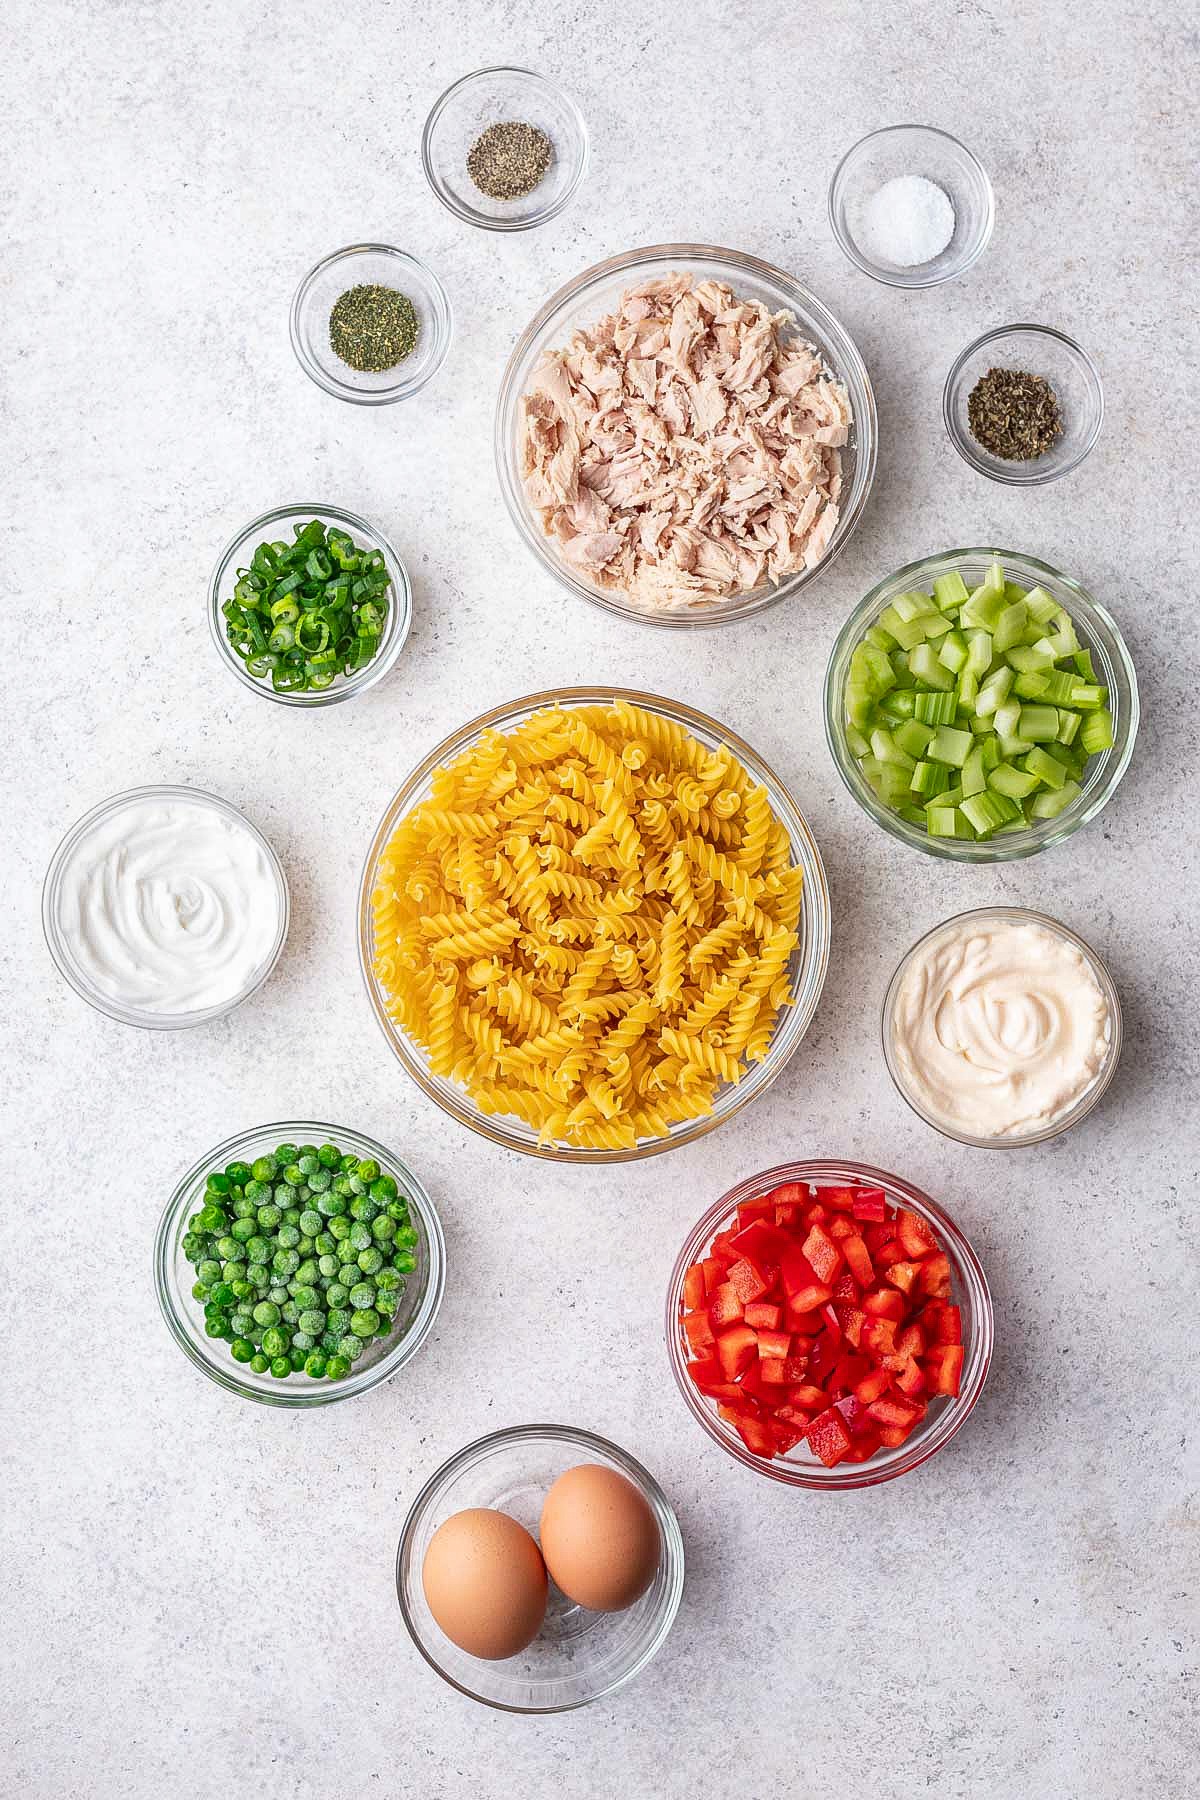 Ingredients for tuna pasta salad, measured and arranged on a work surface.